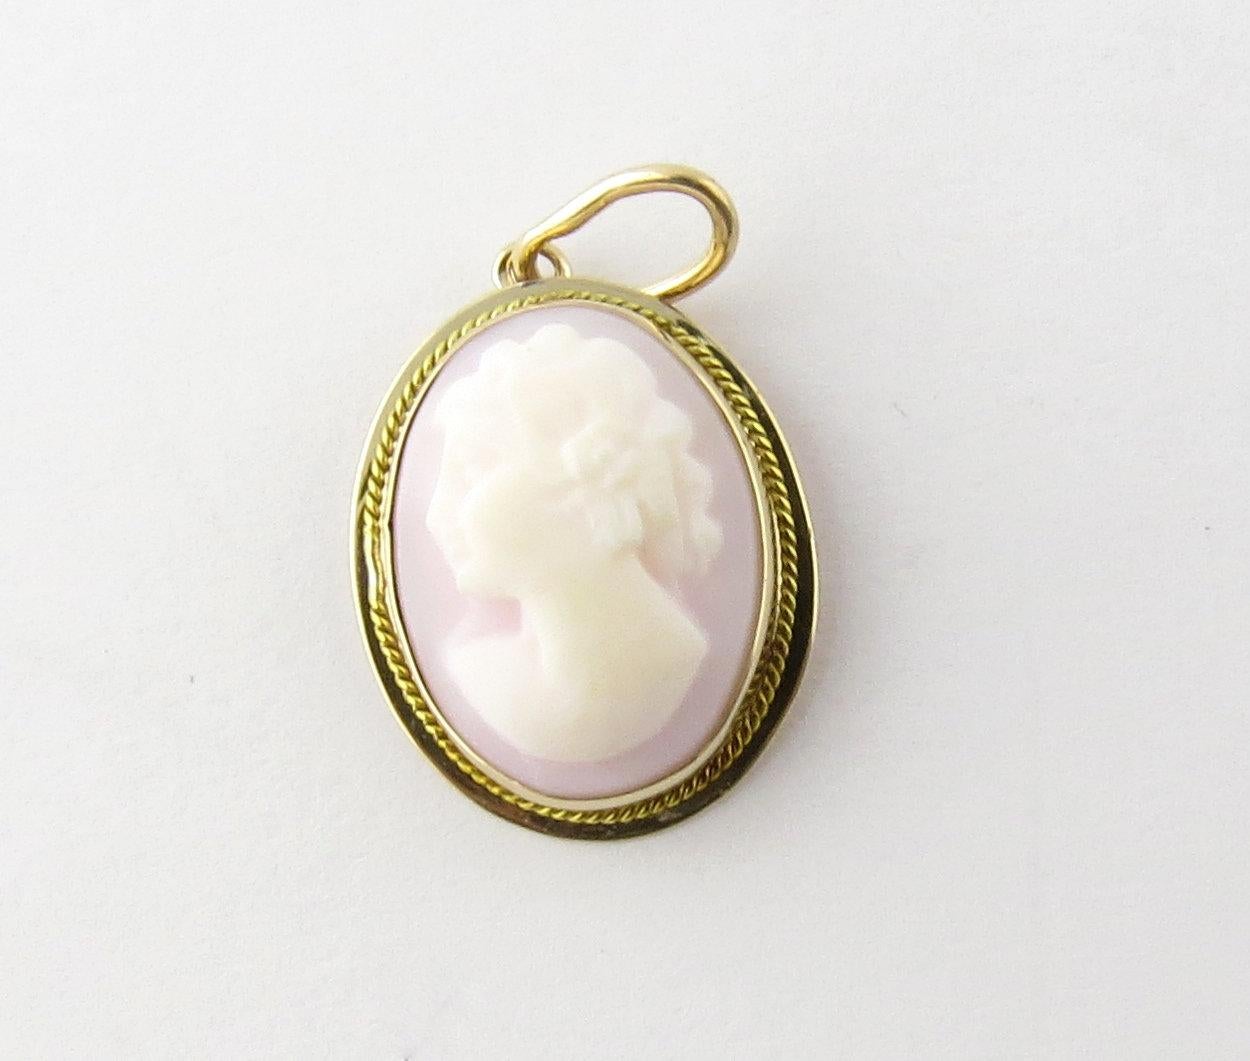 Vintage 14 Karat Yellow Gold Cameo Pendant-

This lovely cameo pendant features a lovely lady in profile framed in classic 14K yellow gold.

Size: 17 mm x 13 mm (actual pendant)

Weight: 0.8 dwt. / 1.3 gr.

Hallmark: 14K

Very good condition,